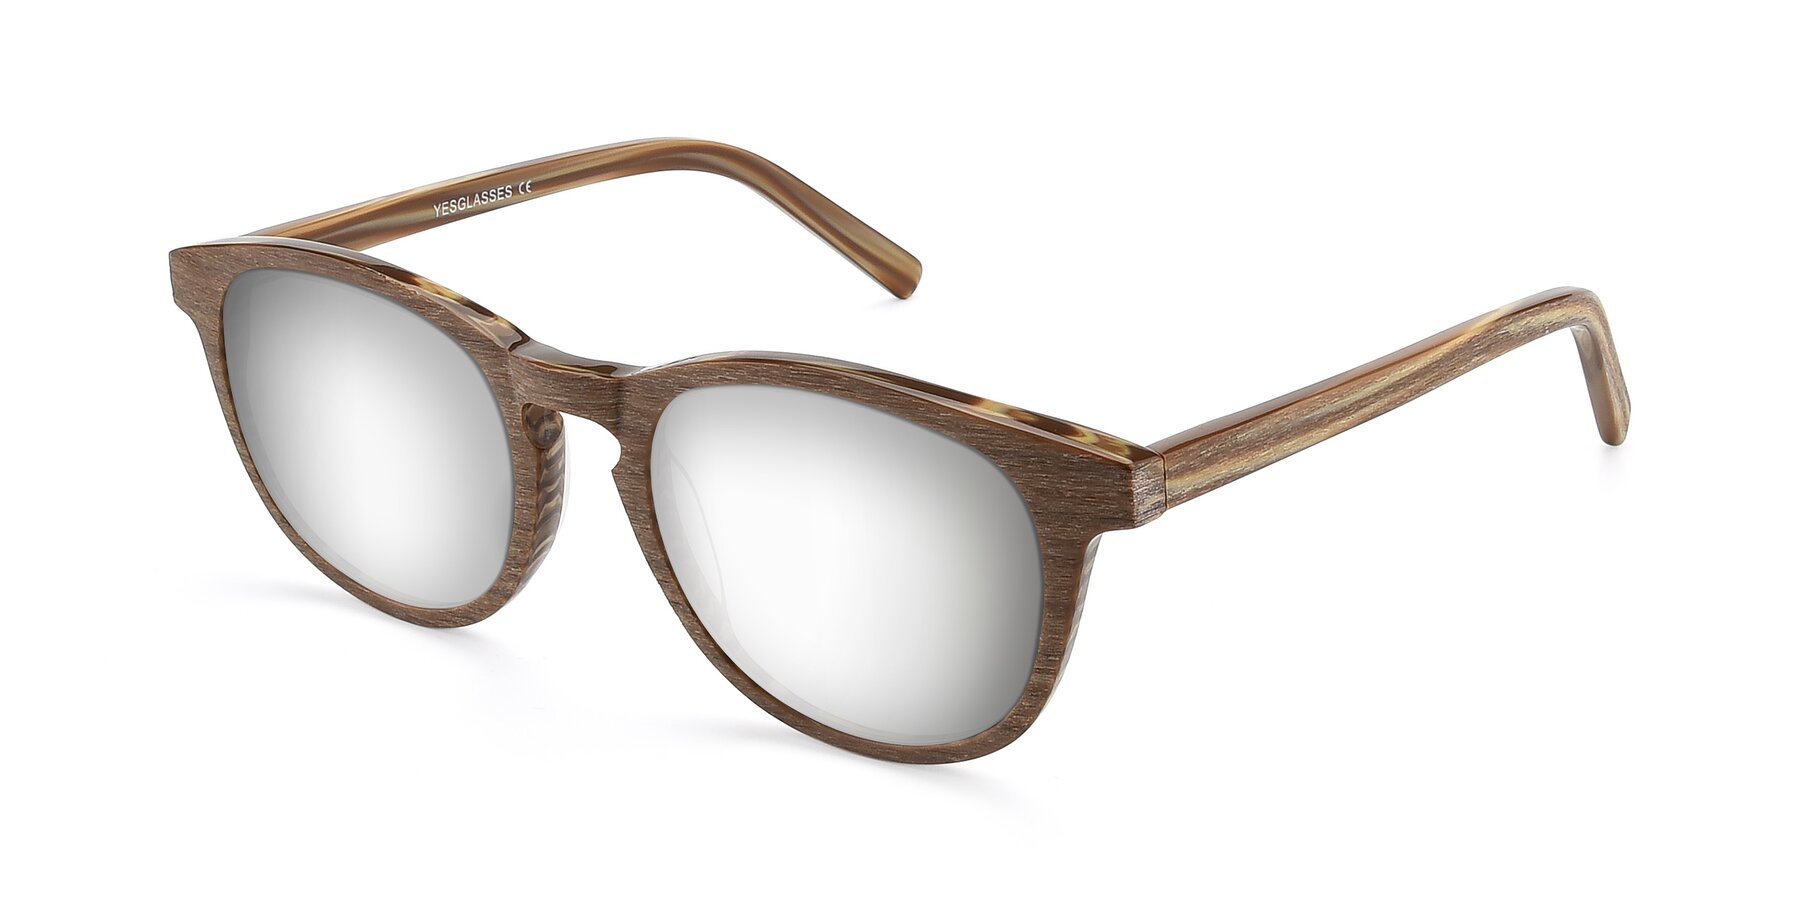 Angle of SR6044 in Brown-Wooden with Silver Mirrored Lenses